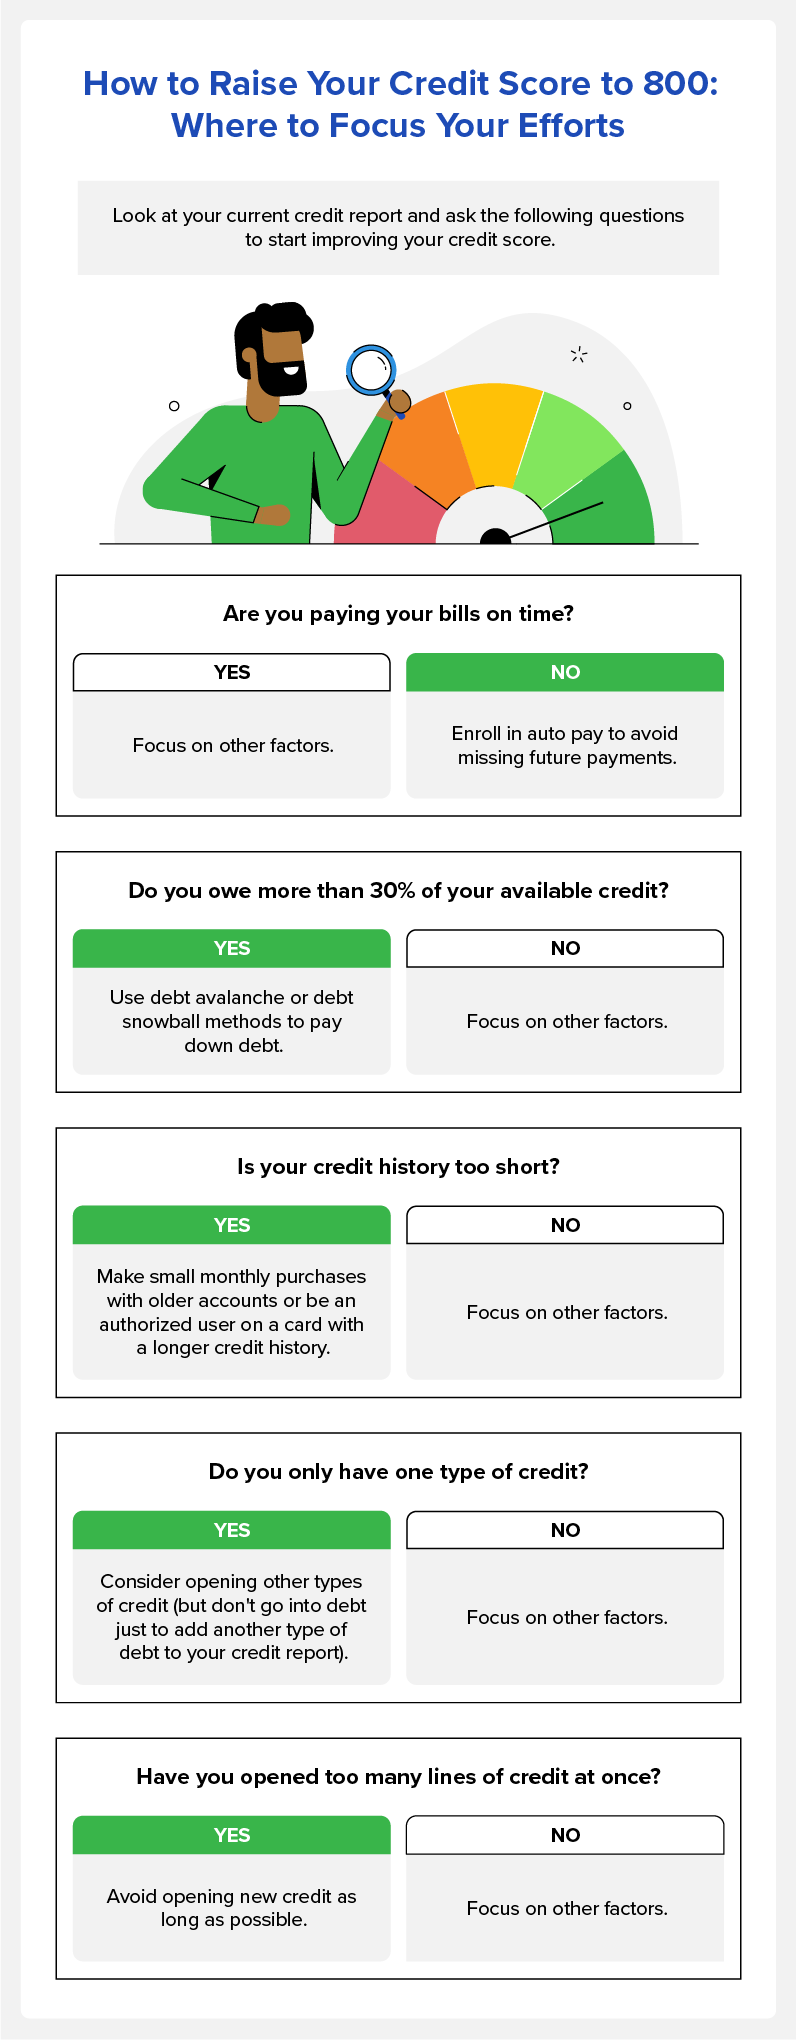 Questions to help you focus your efforts to increase your credit score to 800.